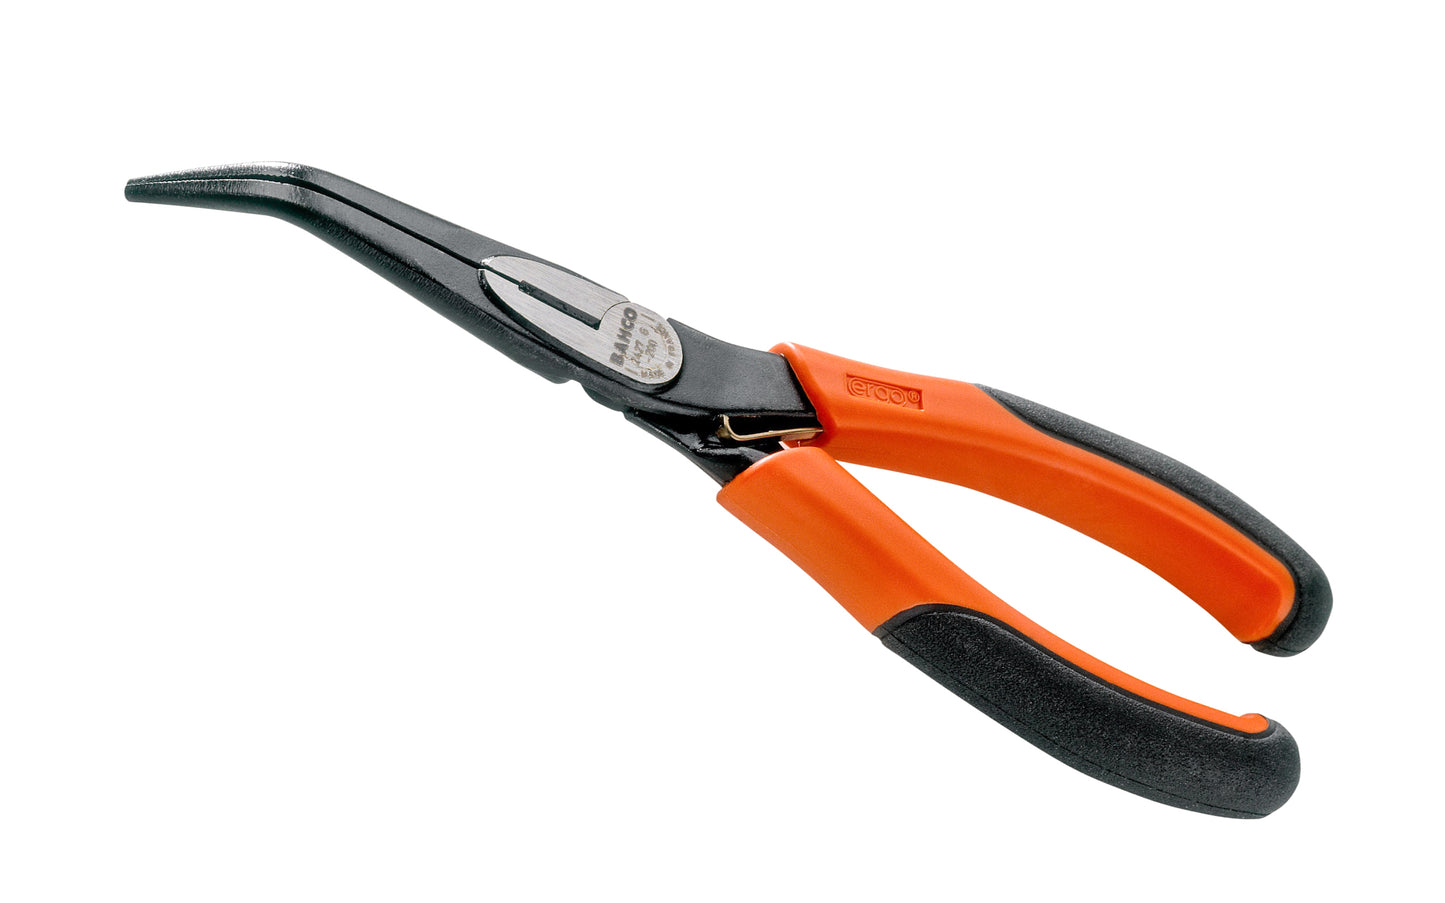 Bahco Curved Nose Plier ~ 45° Bent ~ Made of high-performance alloy steel with fine serration in jaws and a wire cutter on plier ~ Model #2427G-160 